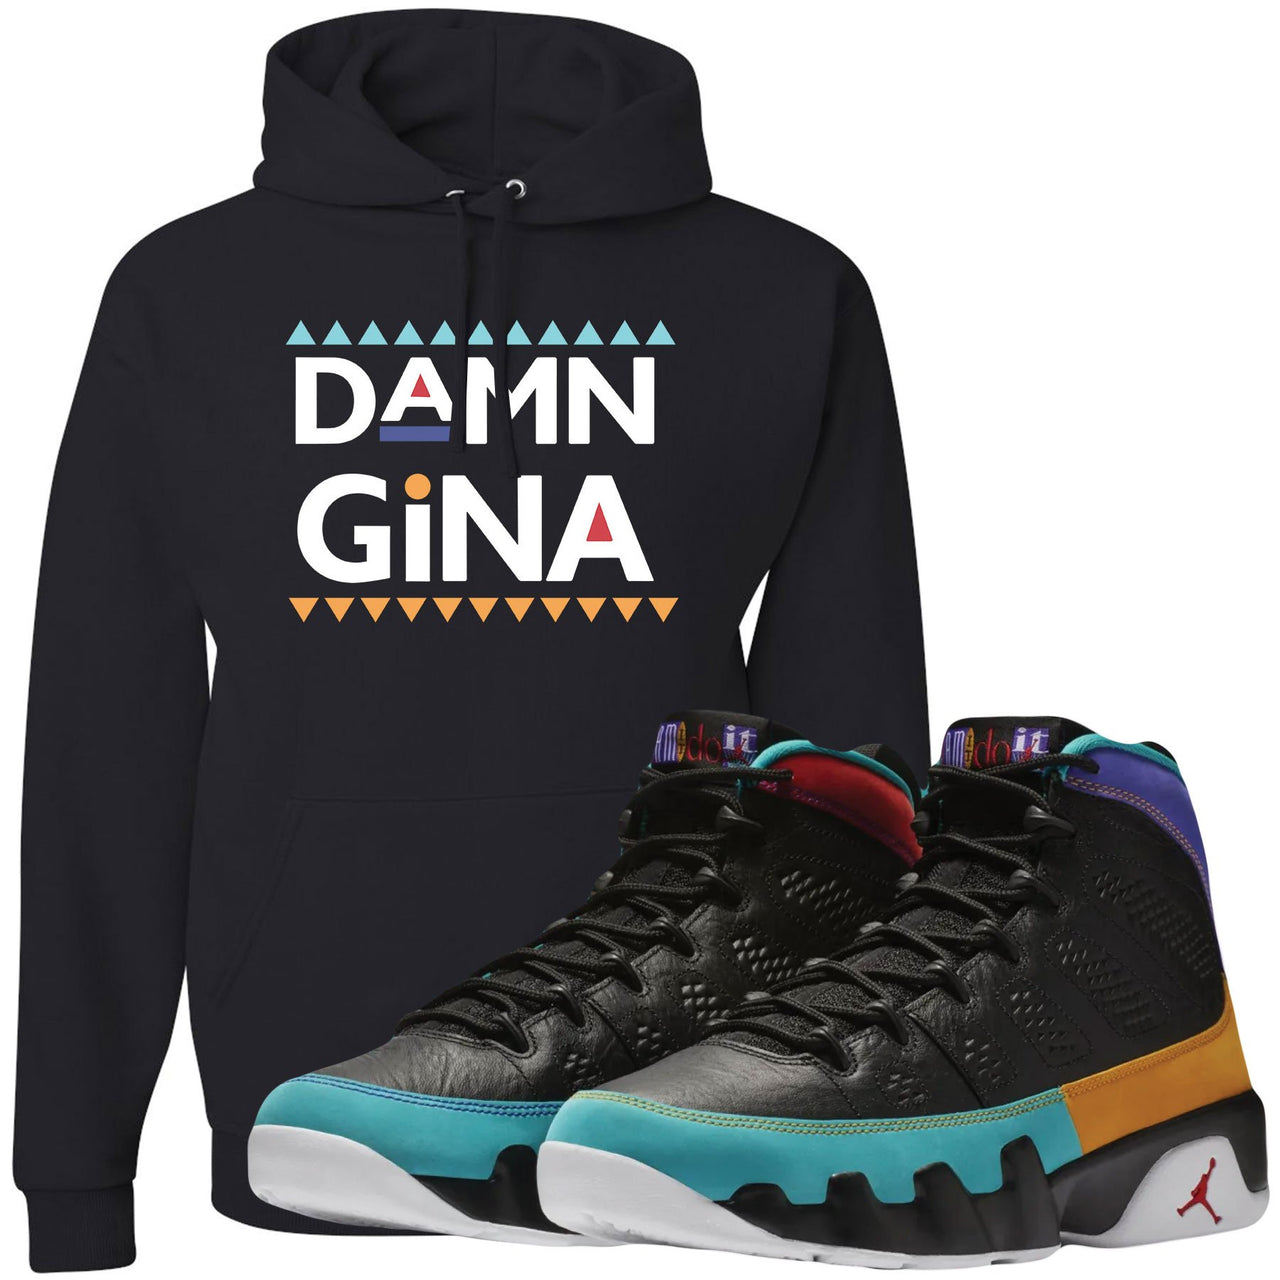 Shop sneaker matching clothing to match your pair of Jordan 9 Dream It Do It Sneakers. This Jordan 9 Dream It Do It sneaker matching item will perfectly match the Dream It Do It 9s.